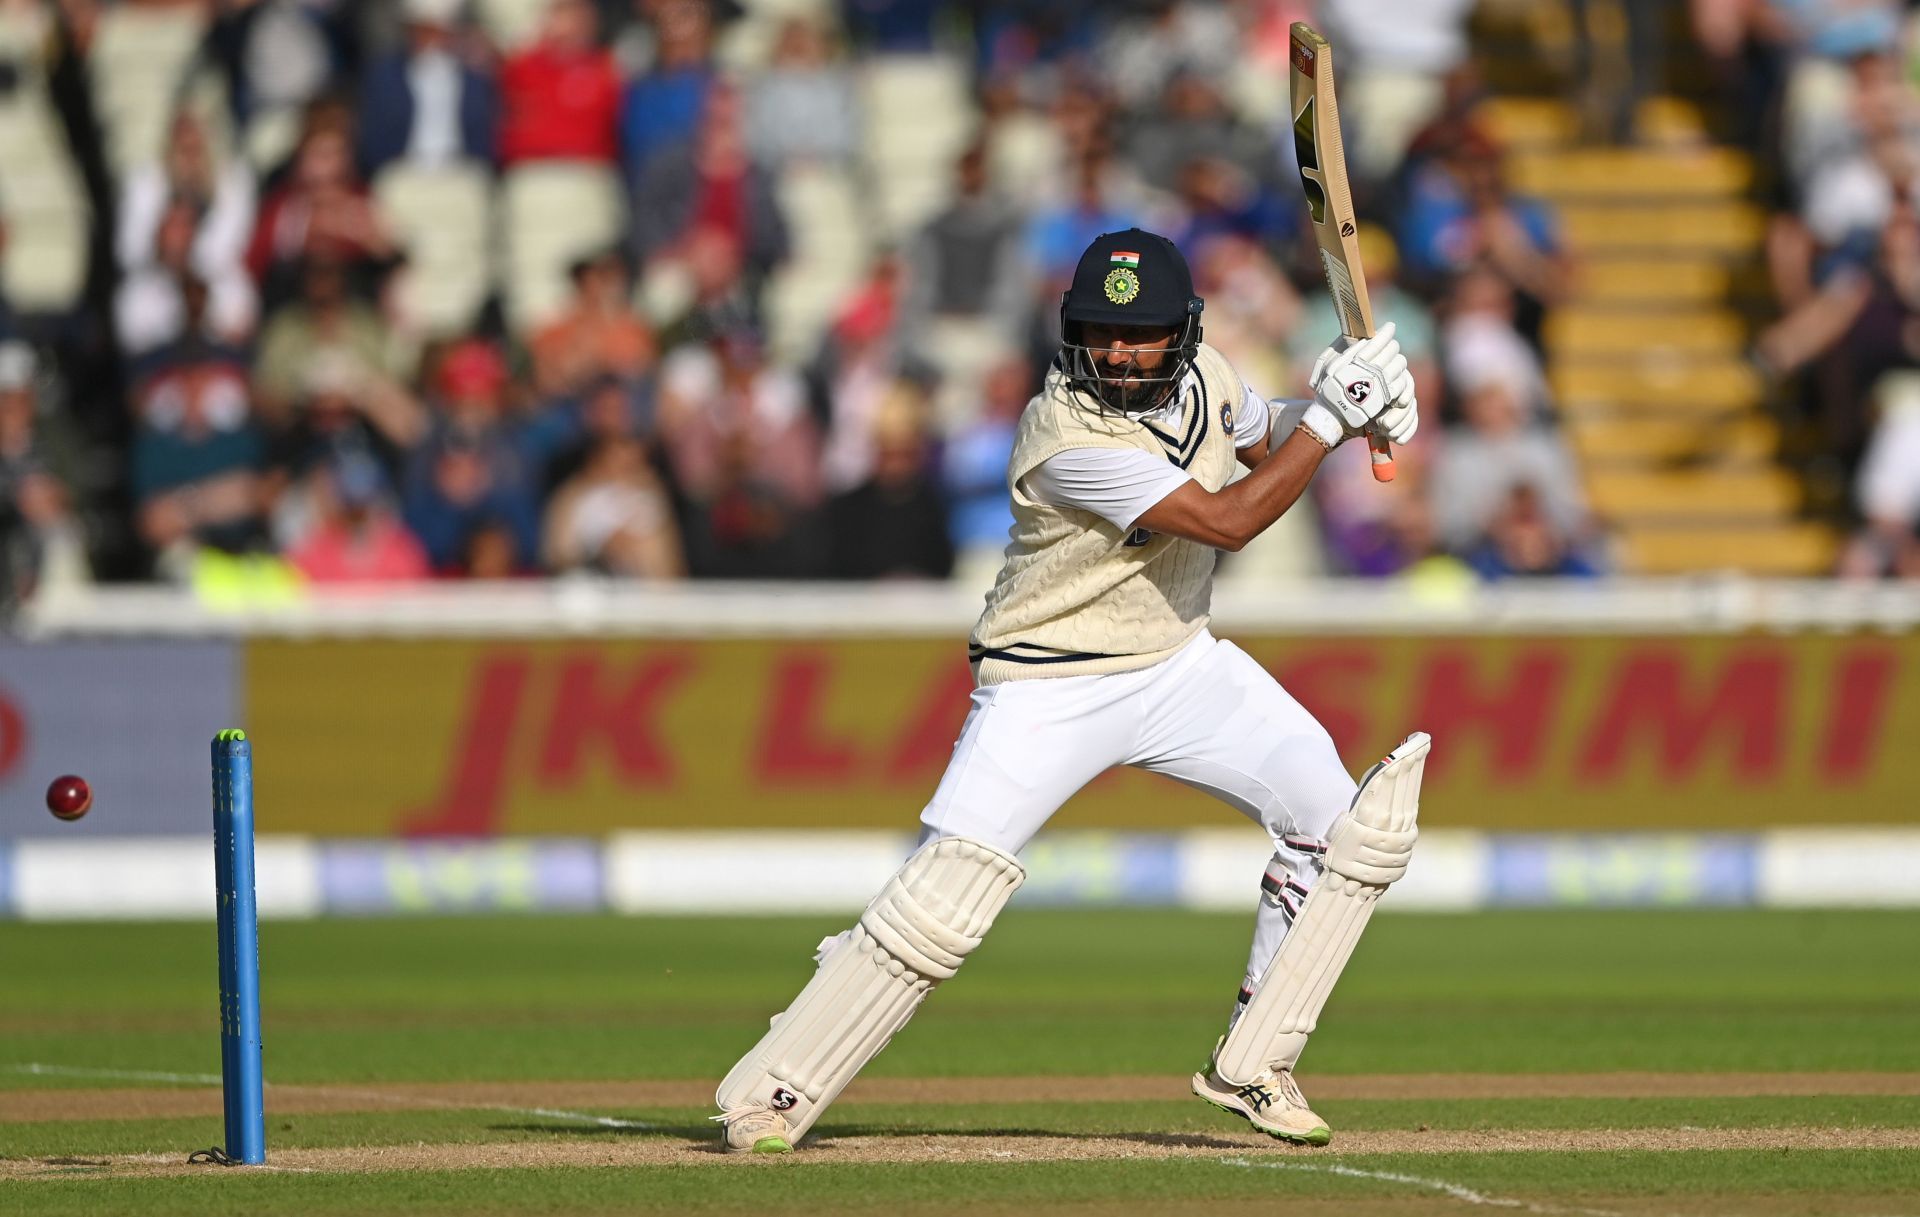 England v India - Fifth LV= Insurance Test cricket Match: Day Three (Image: Getty)